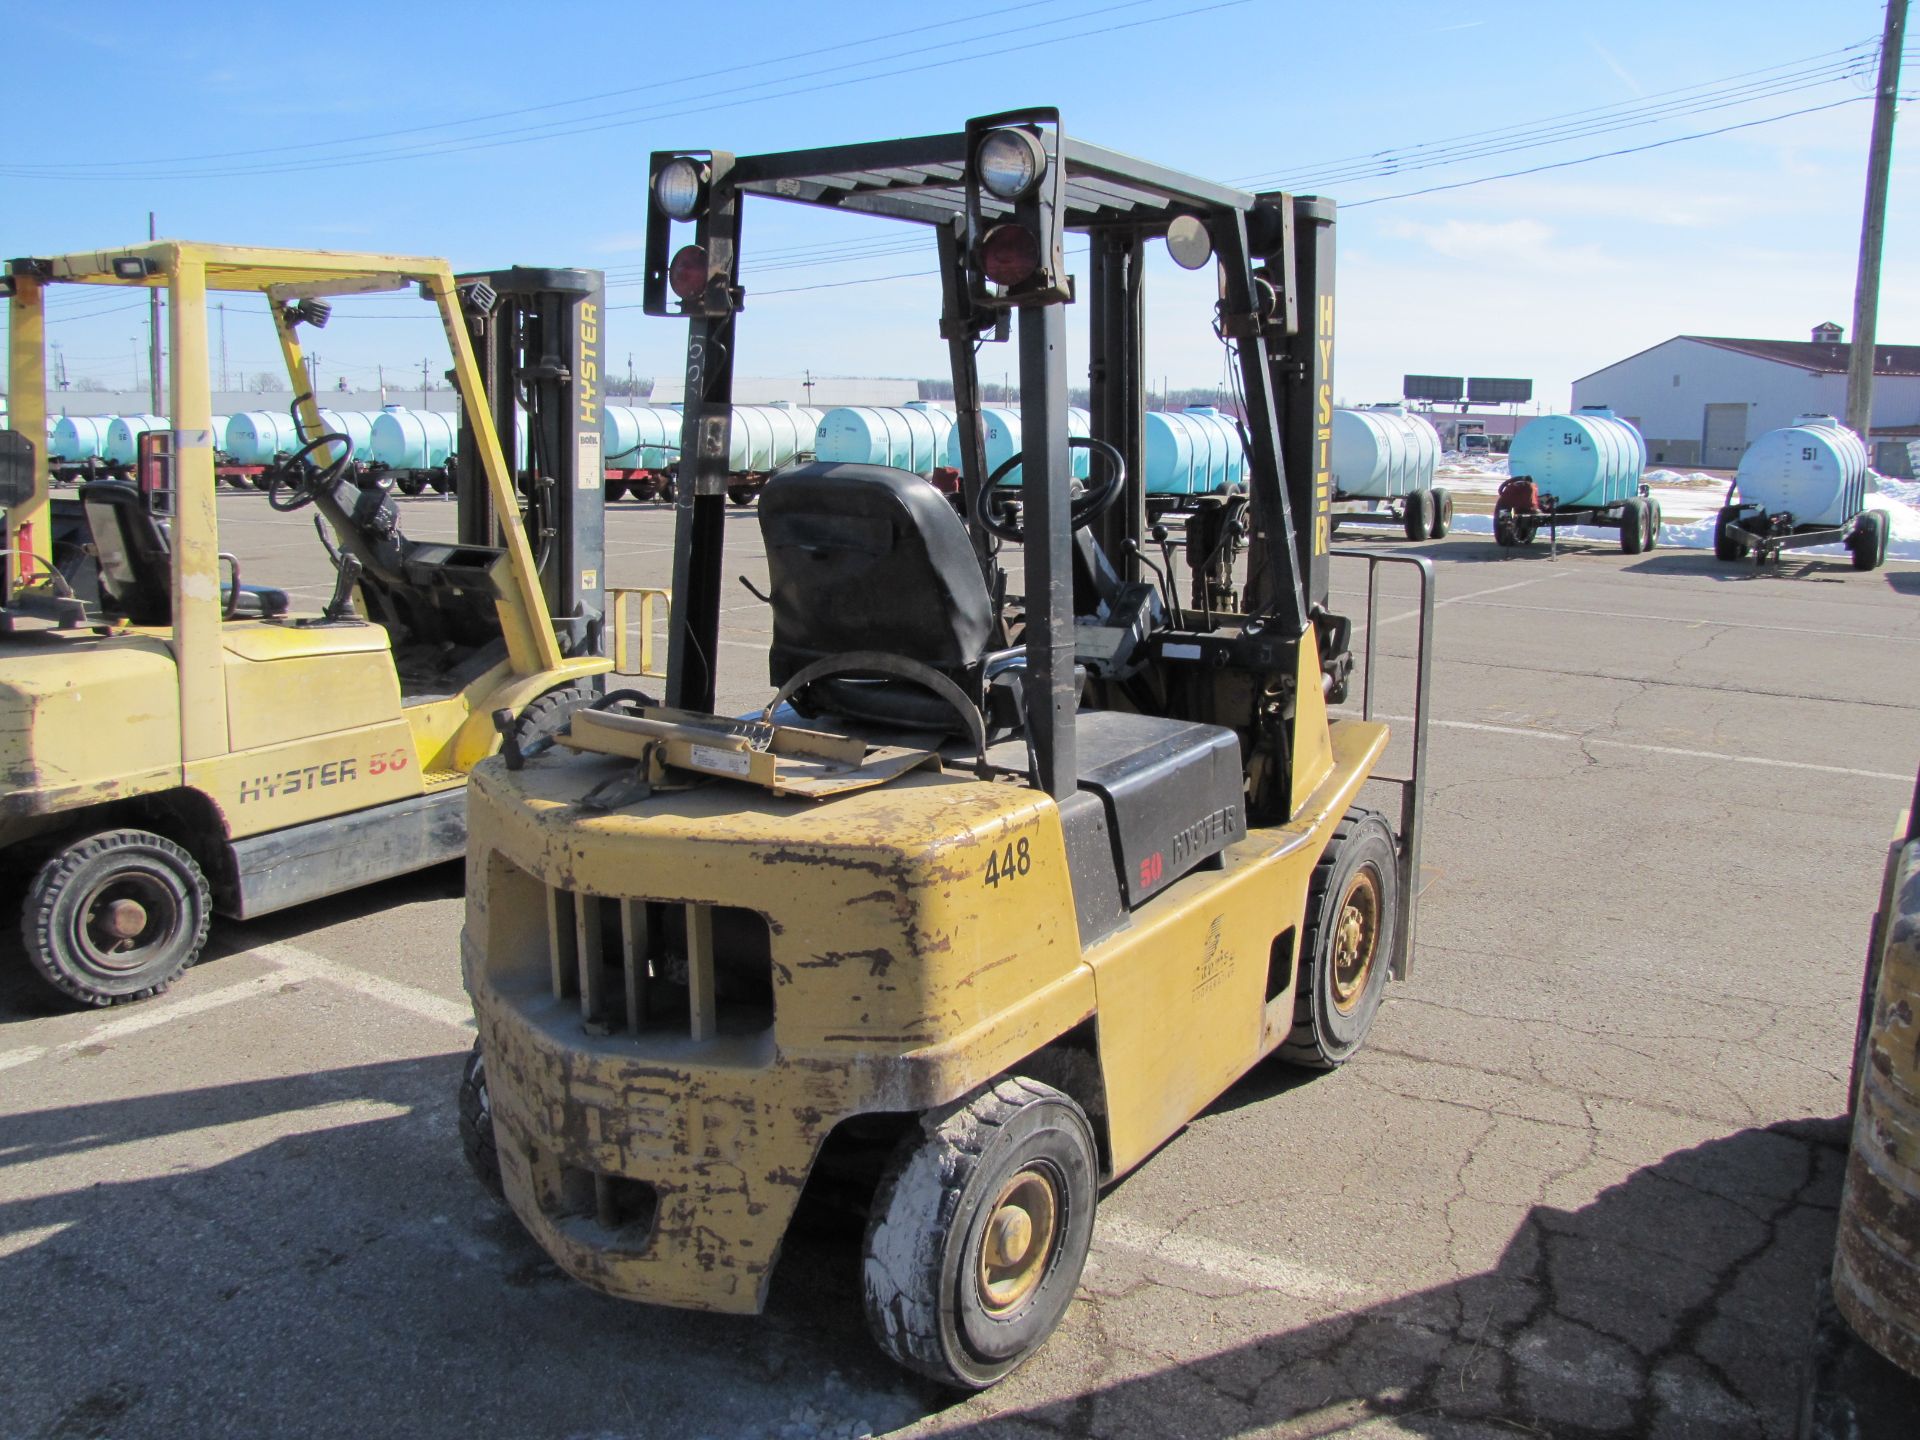 Hyster 50 forklift, 4500 lb capacity, propane, 3-stage, side shift, 7.00x12 fronts, 6.00x9 rears - Image 4 of 13